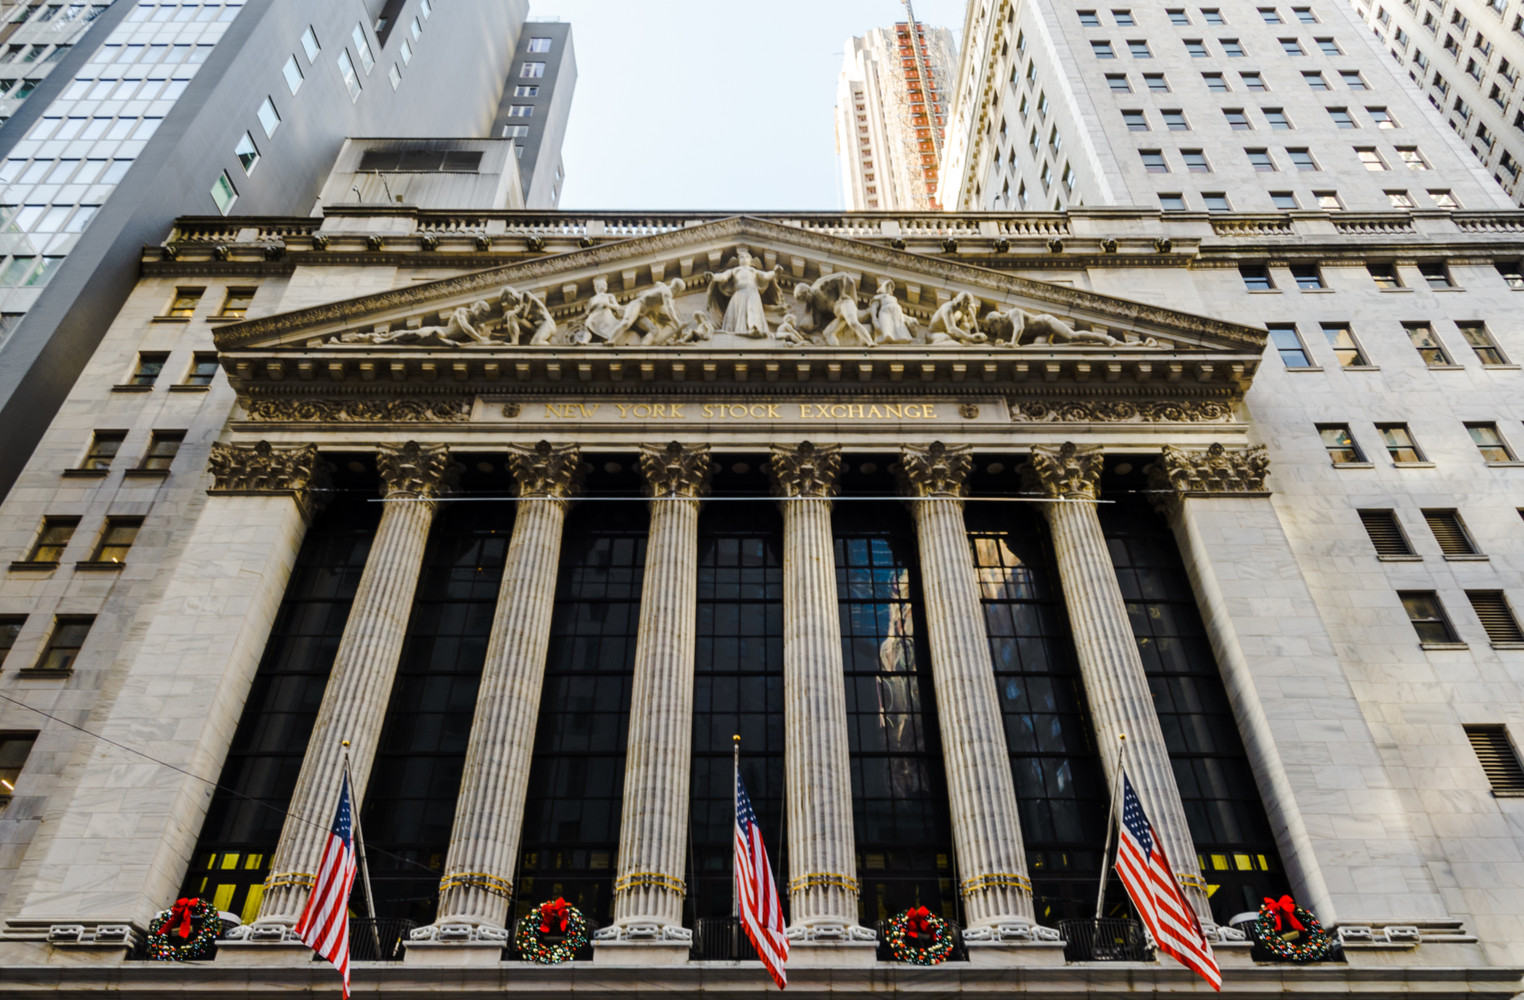 Not Just Ebay, NYSE Owner Intercontinental Exchange to Push Bakkt to Retail With Latest Acquisition